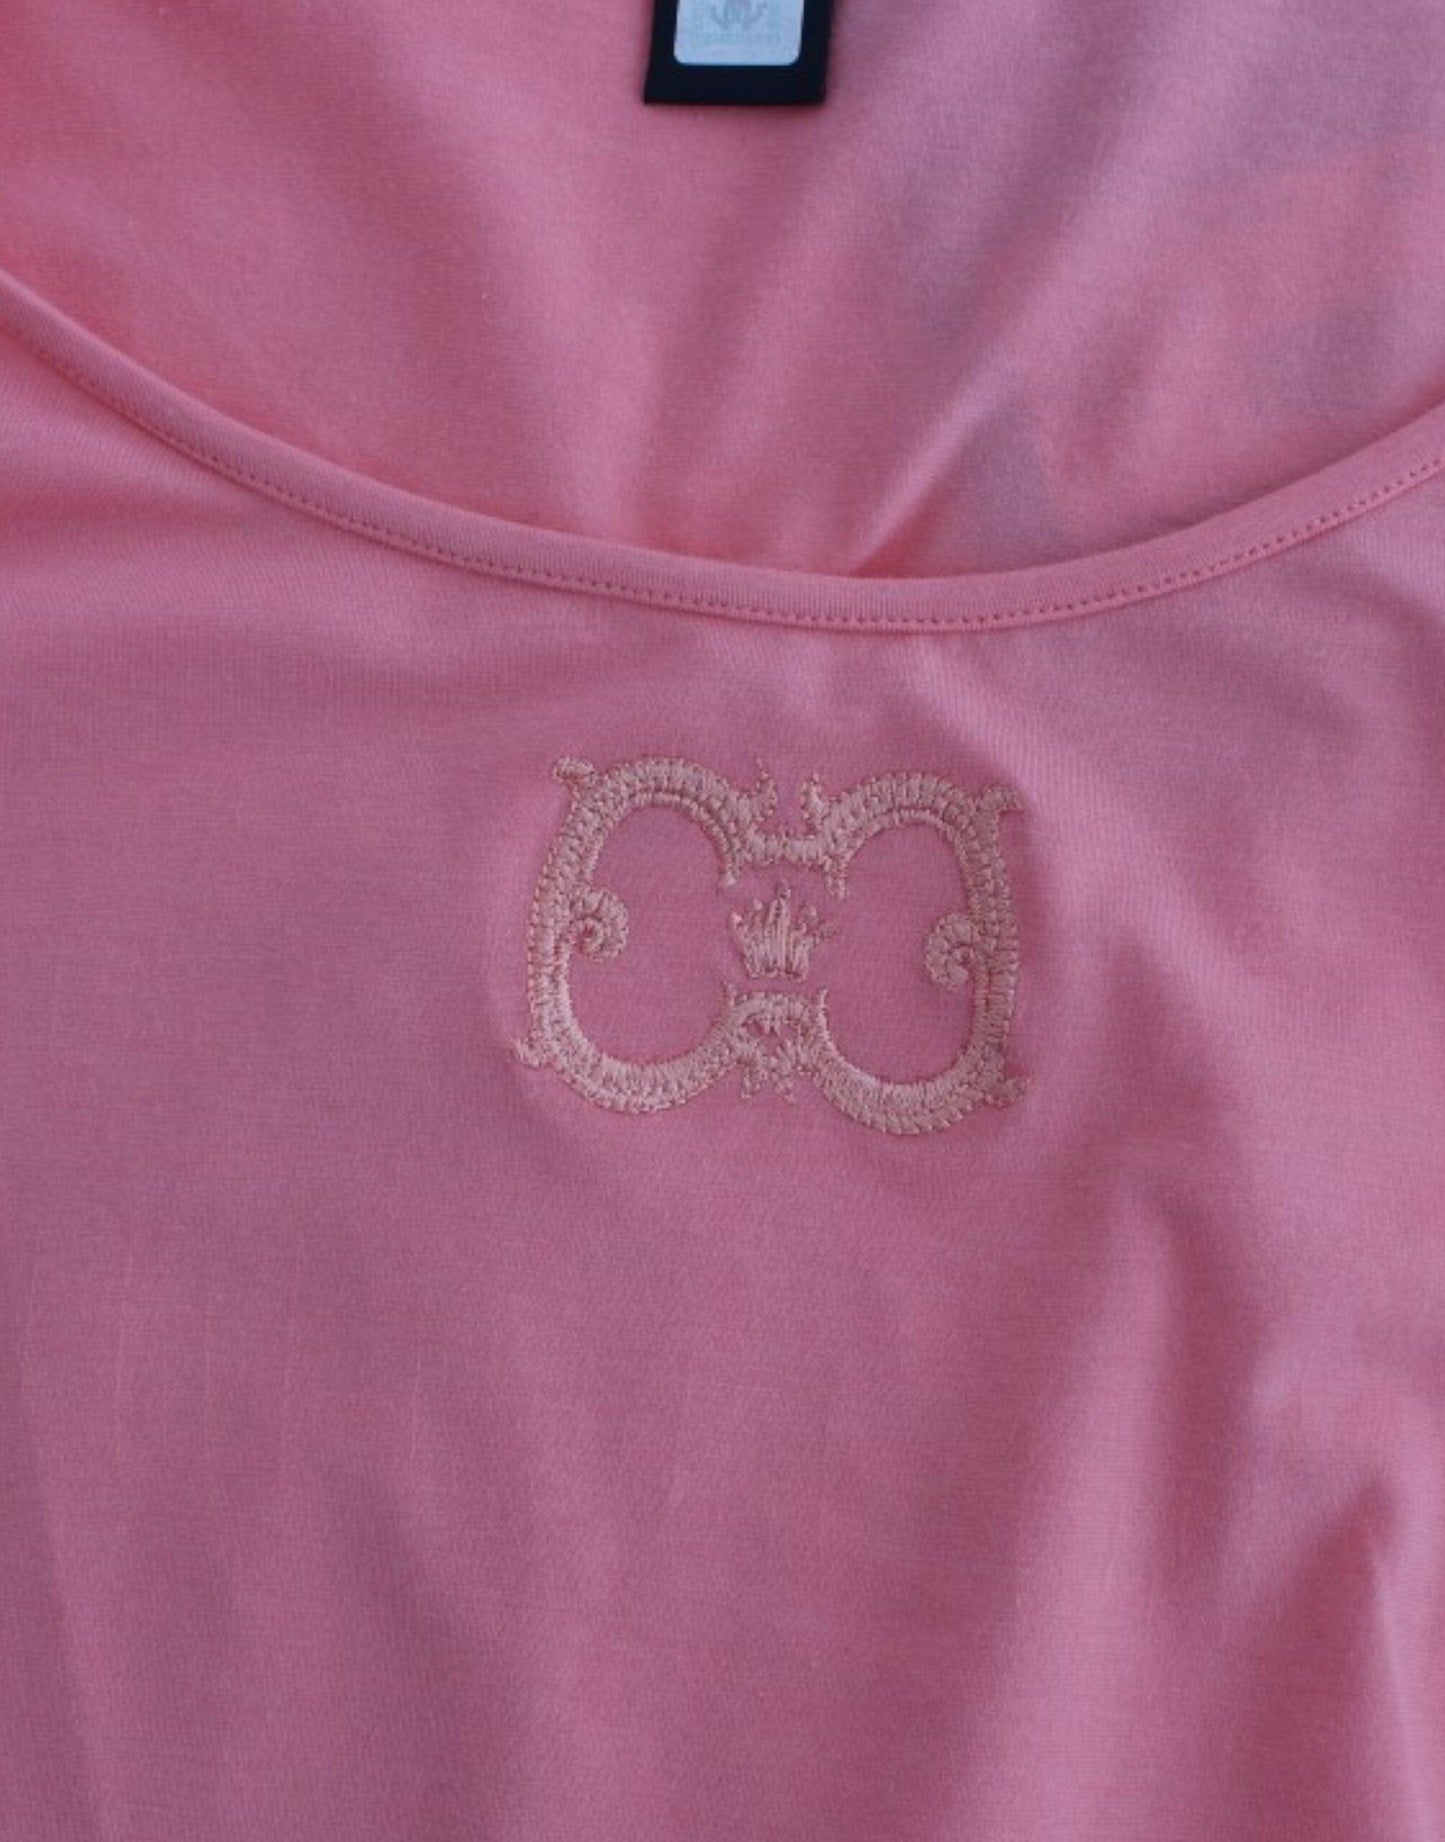 Cavalli Pink Cotton Blend Tank Top with Cap Sleeves - PER.FASHION